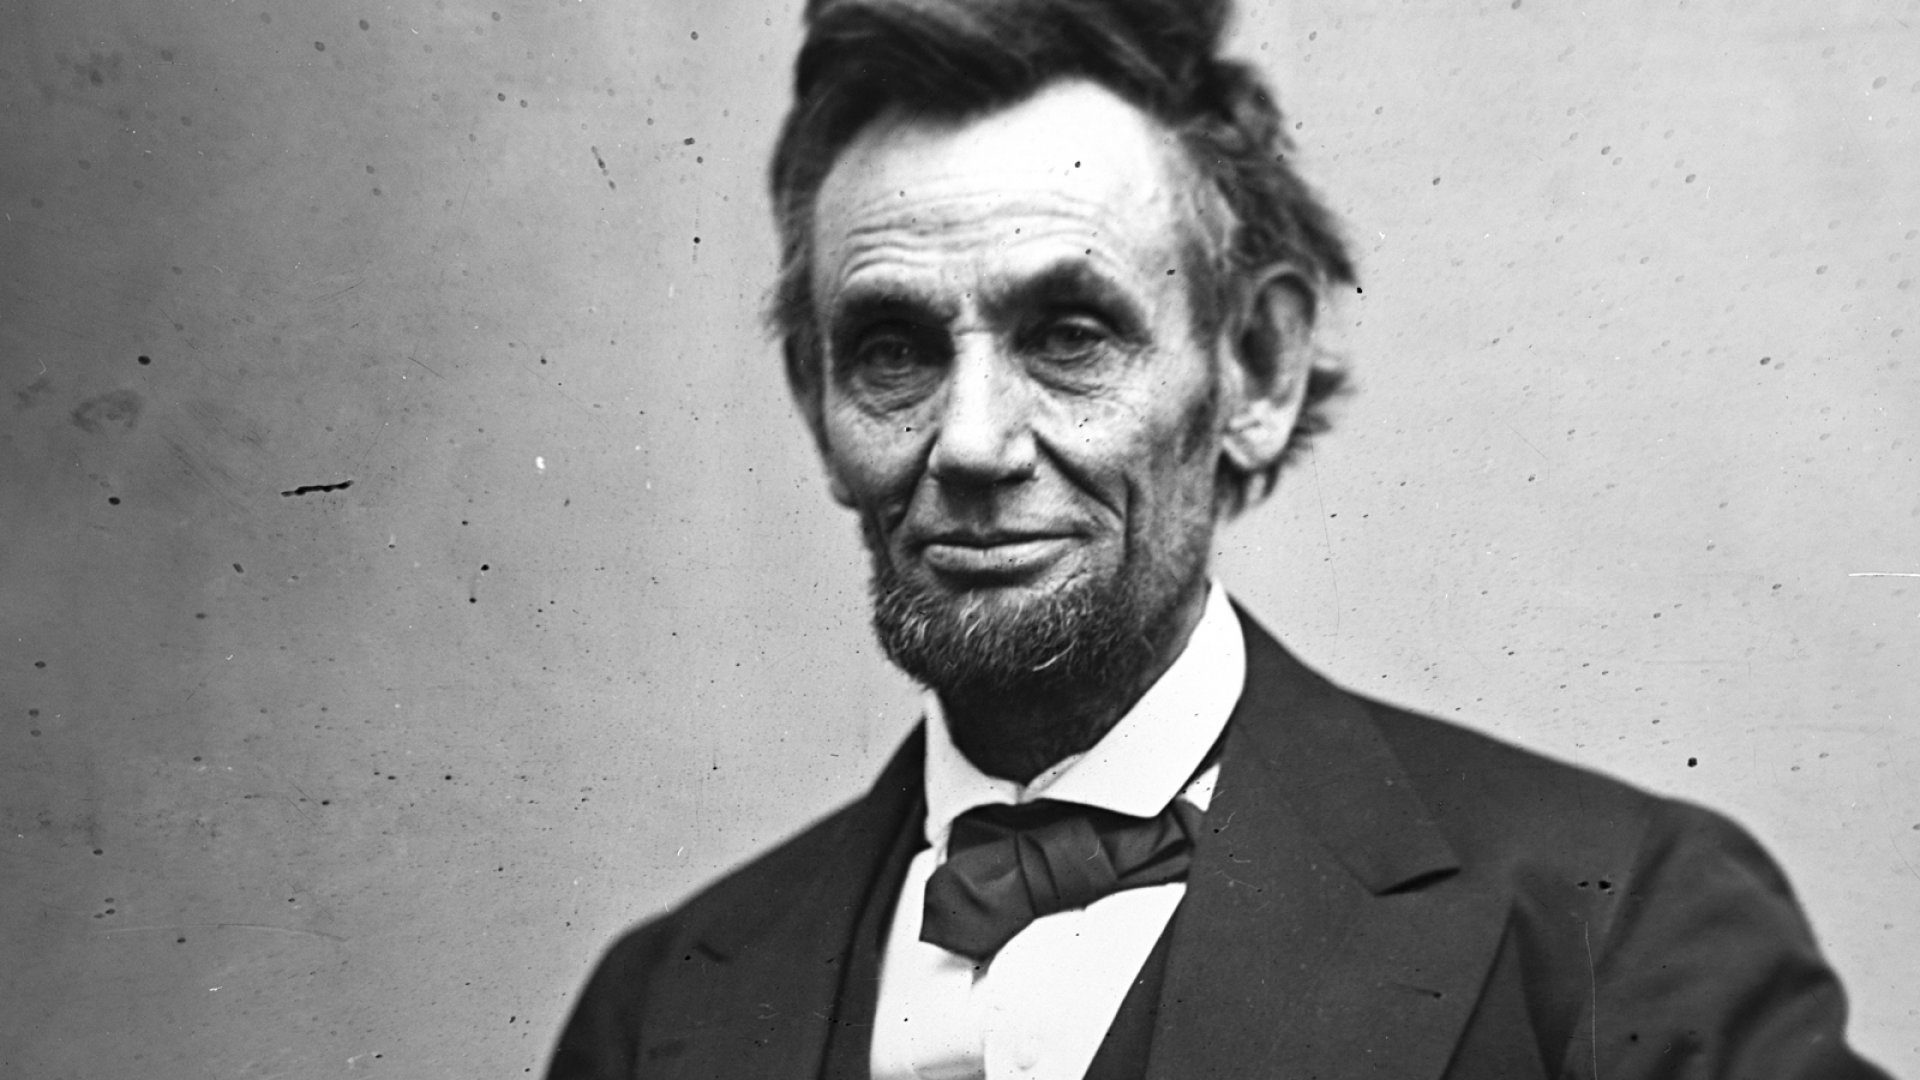 Image for “With Malice Toward None”: Lincoln’s Second Inaugural